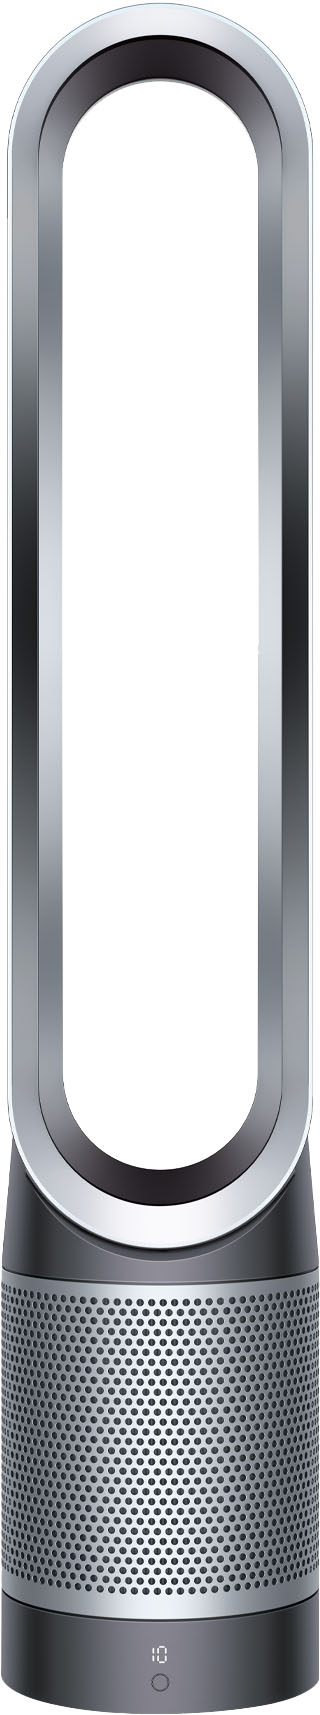 Angle View: Dyson - Pure Cool Link - TP02 - Smart Tower Air Purifier and Fan - Ir/Sil